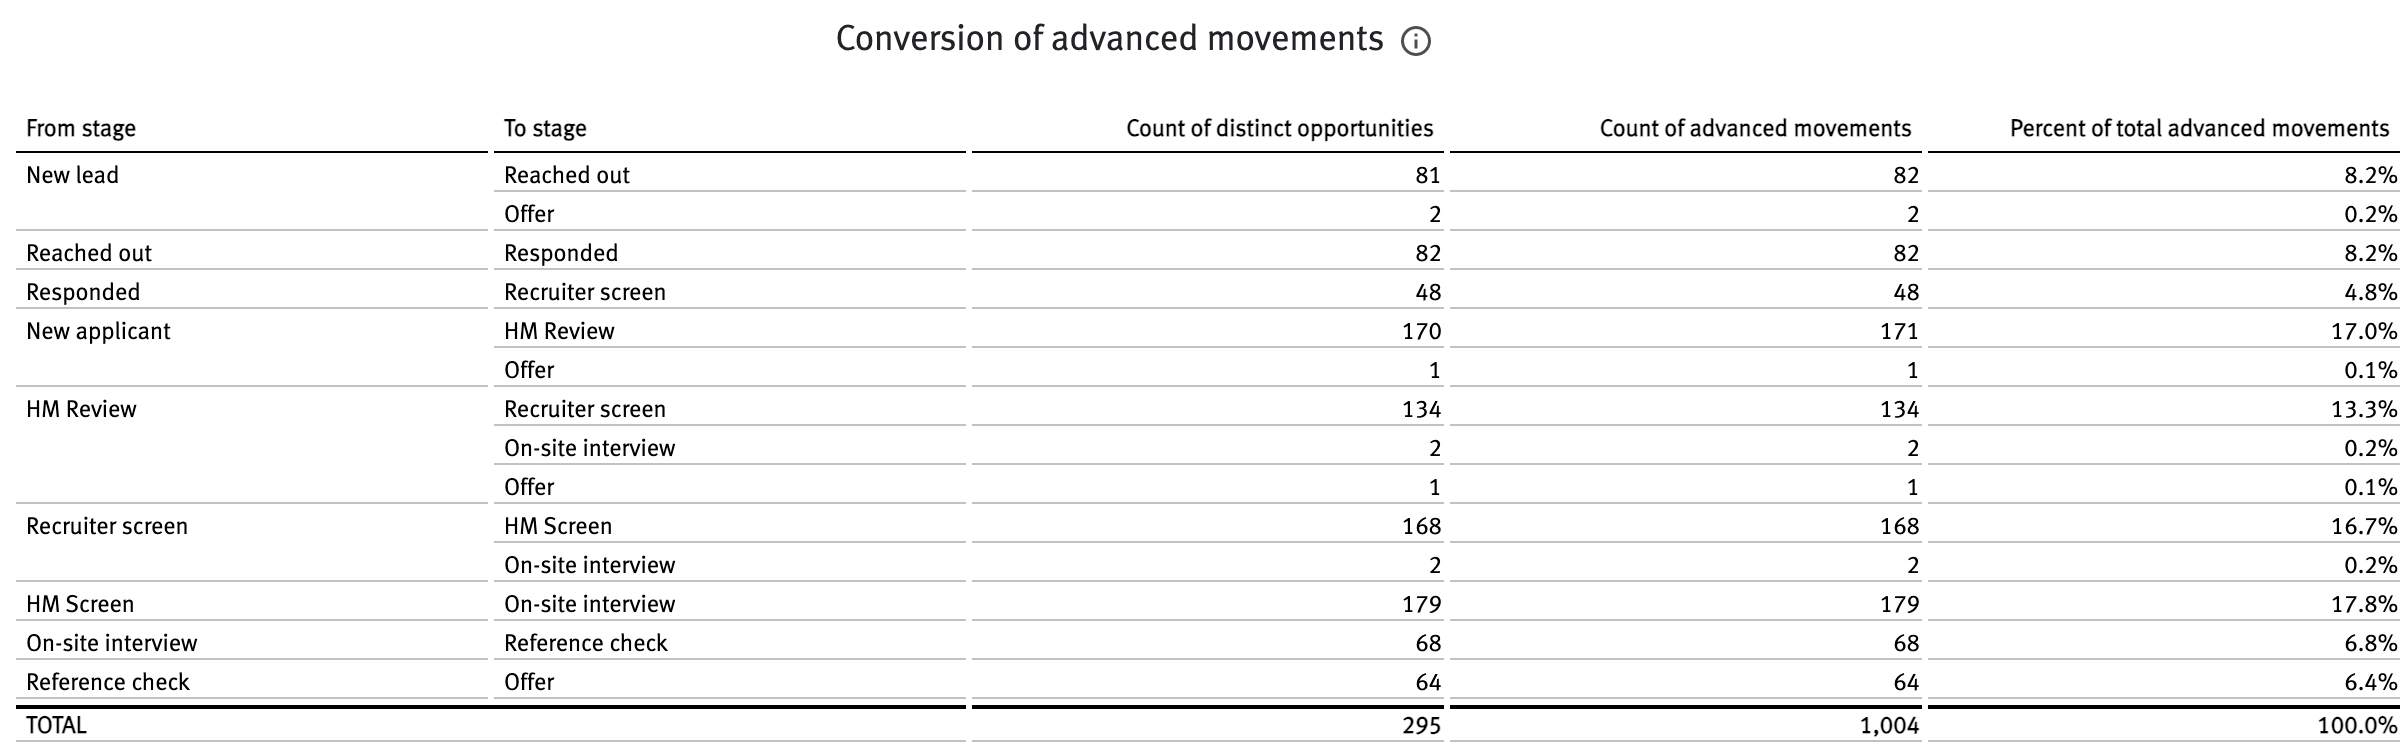 Conversion of advanced movements table